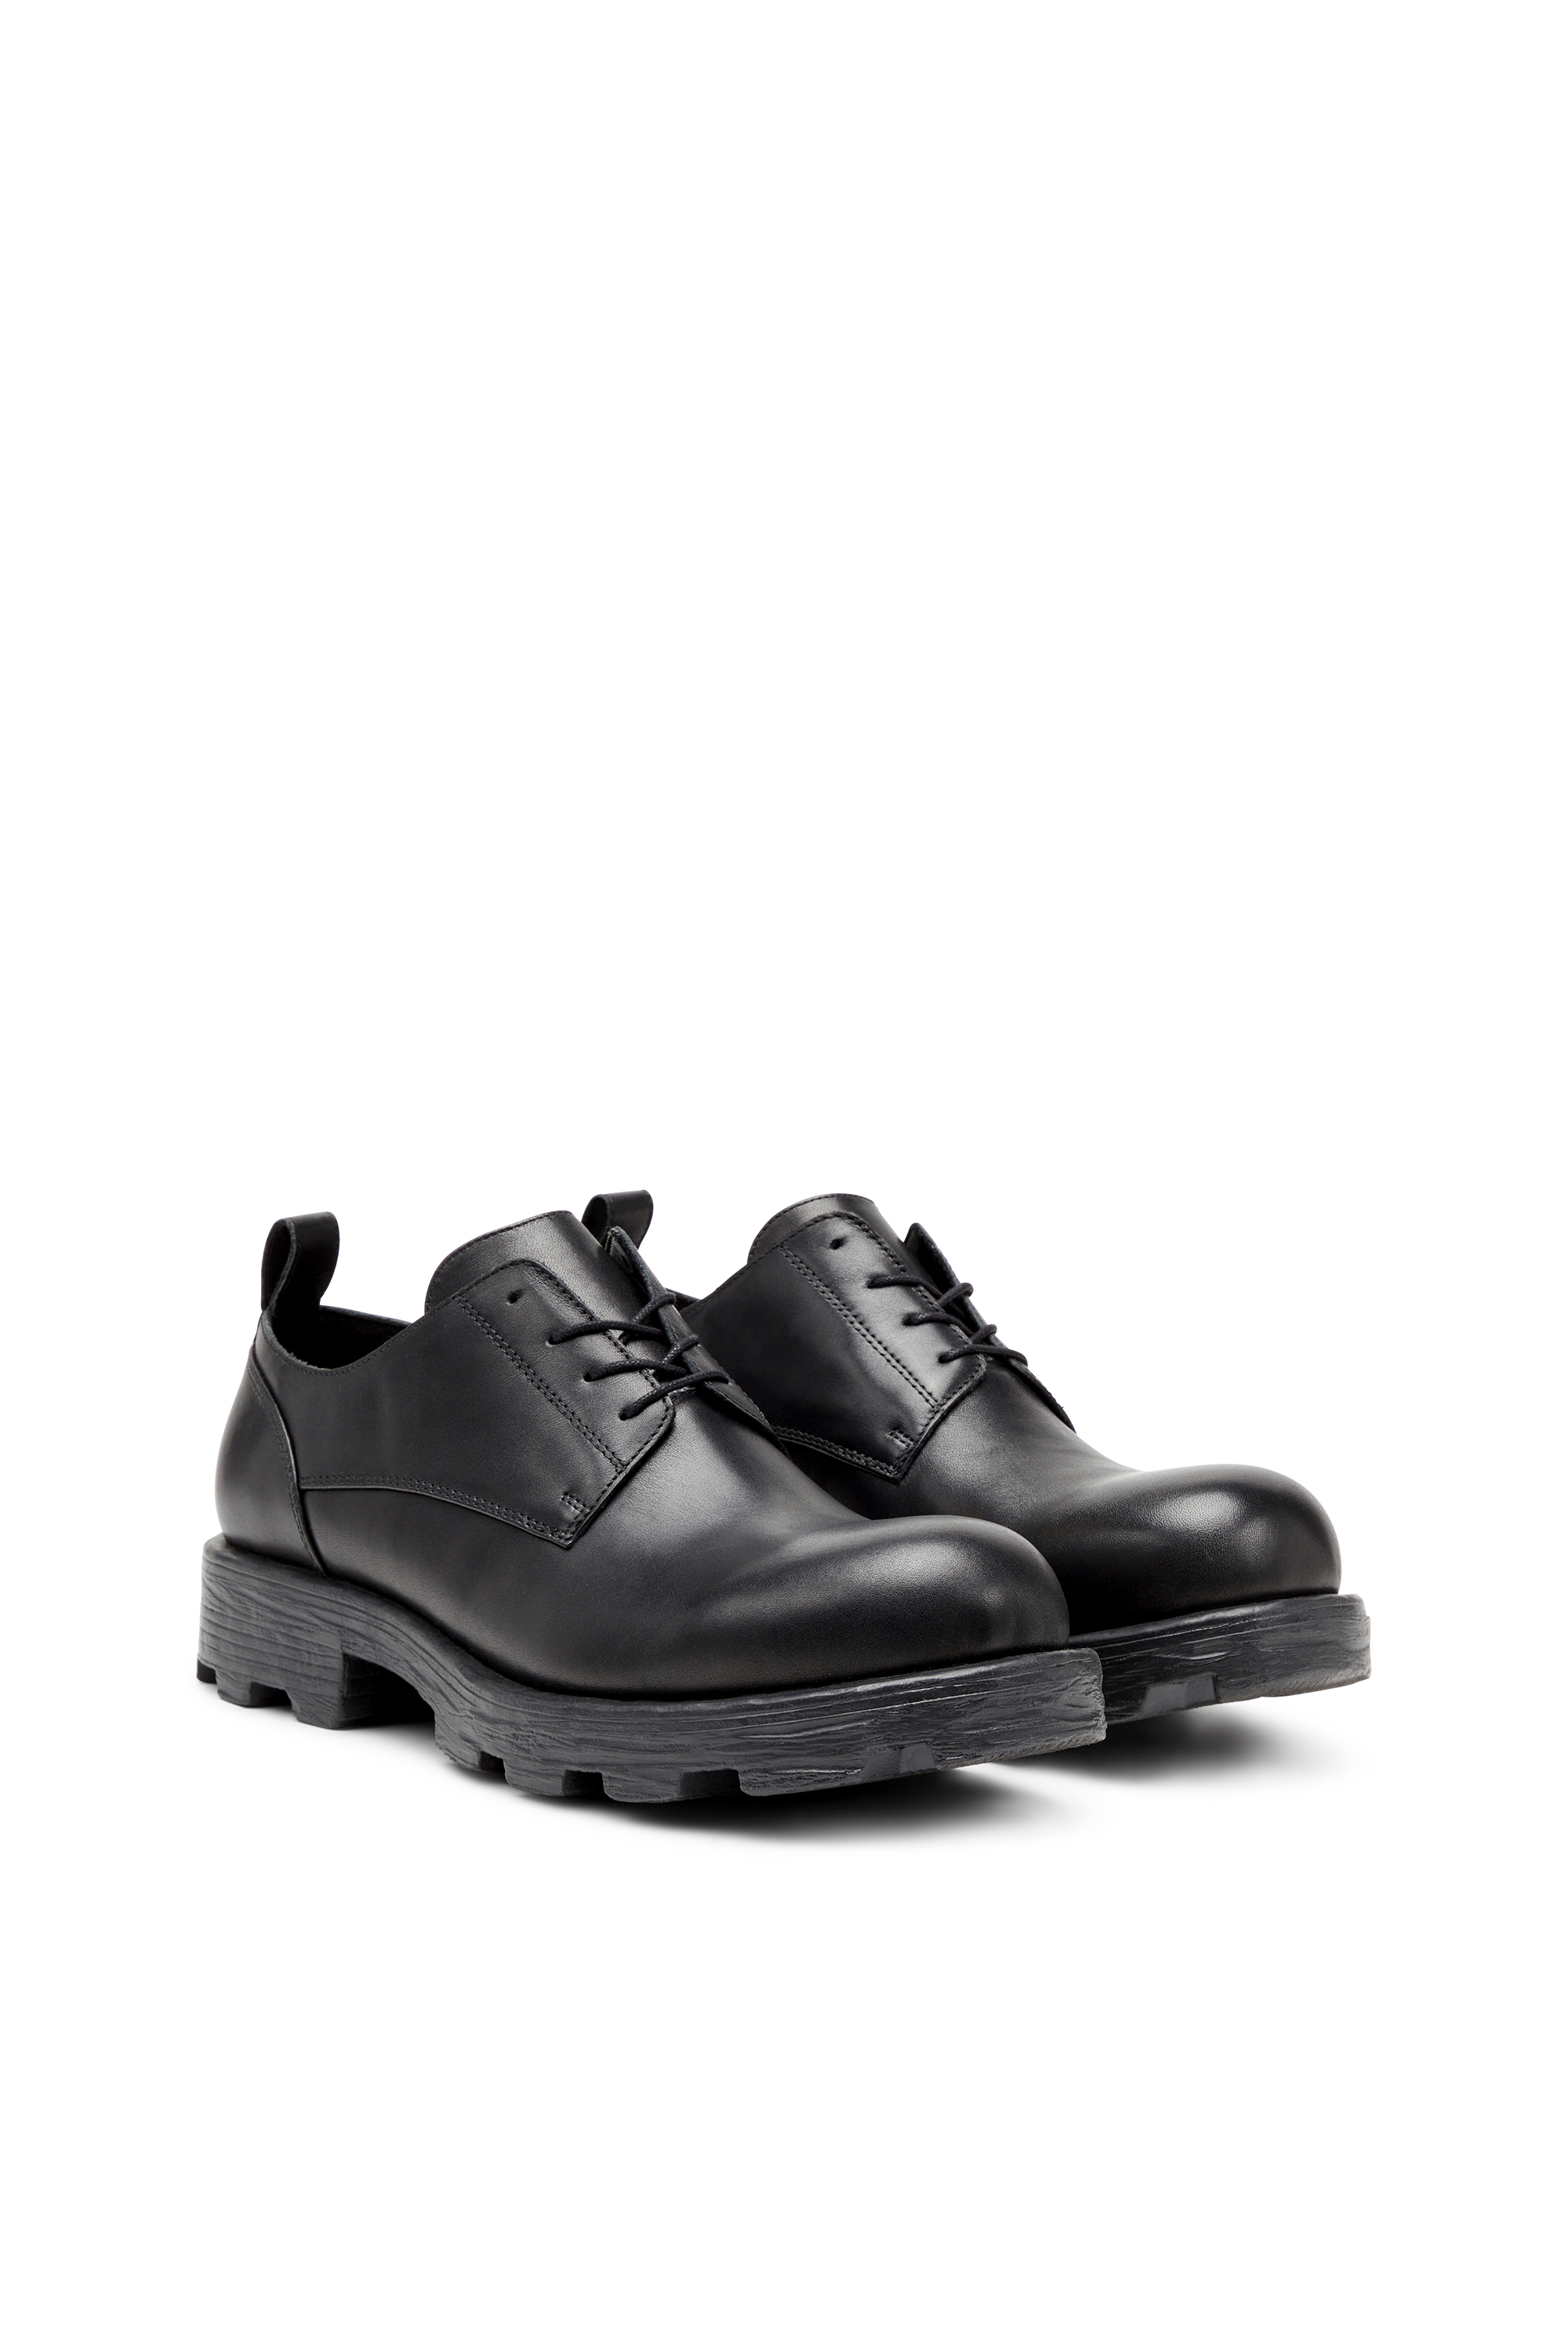 Diesel - D-HAMMER SH, Man D-Hammer-Derby shoes in textured leather in Black - Image 2